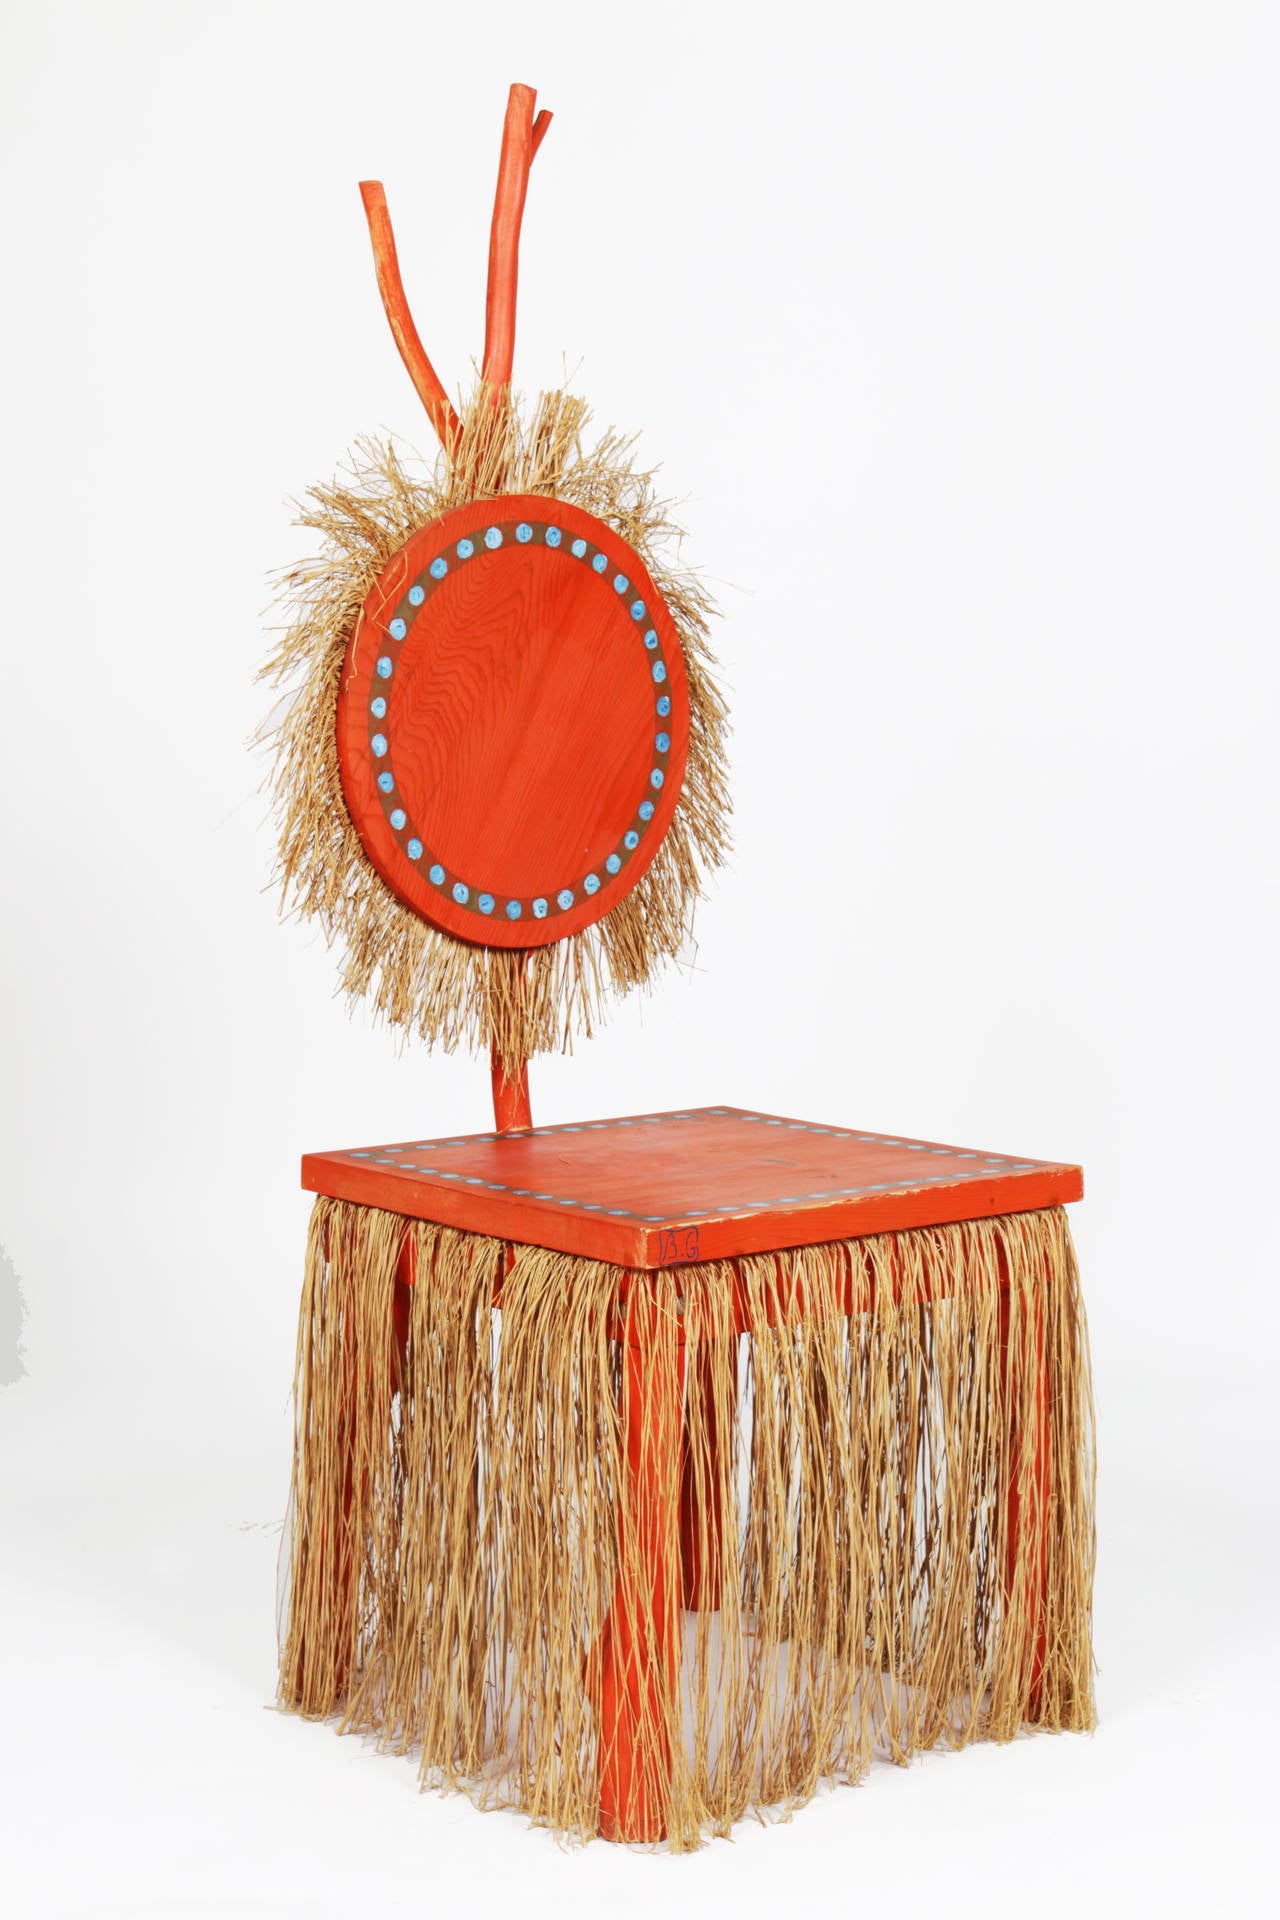 French designers Elizabeth Garouste and Mattia Bonetti created this limited edition painted wood and raffia chair named the 